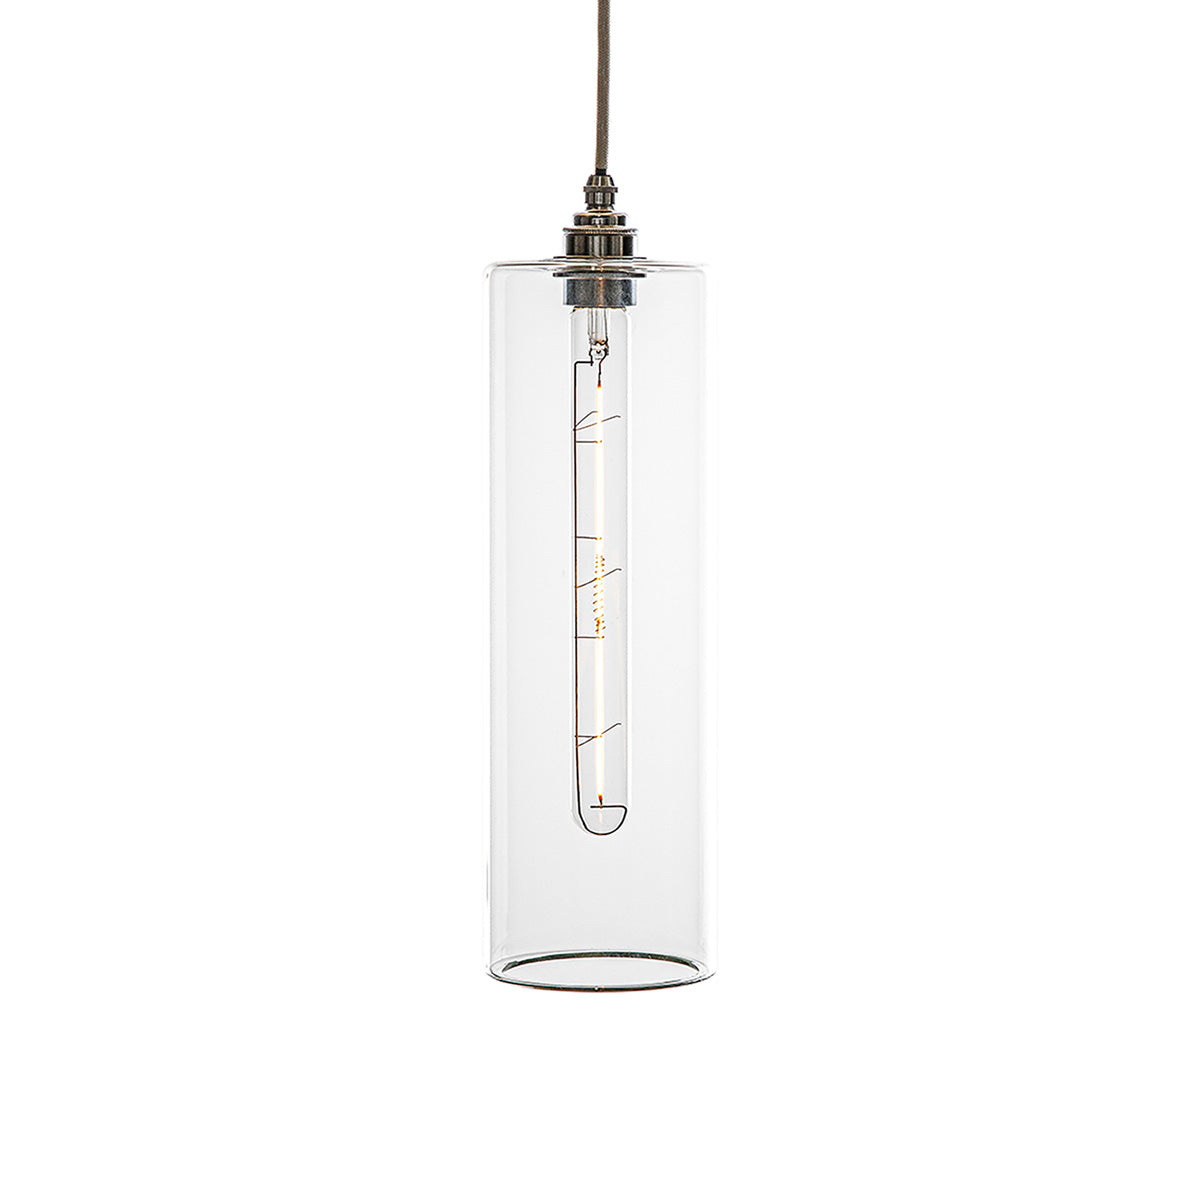 Piccadilly style hand-blown pendant light with clear glass, which is sold by South Charlotte Fine Lighting